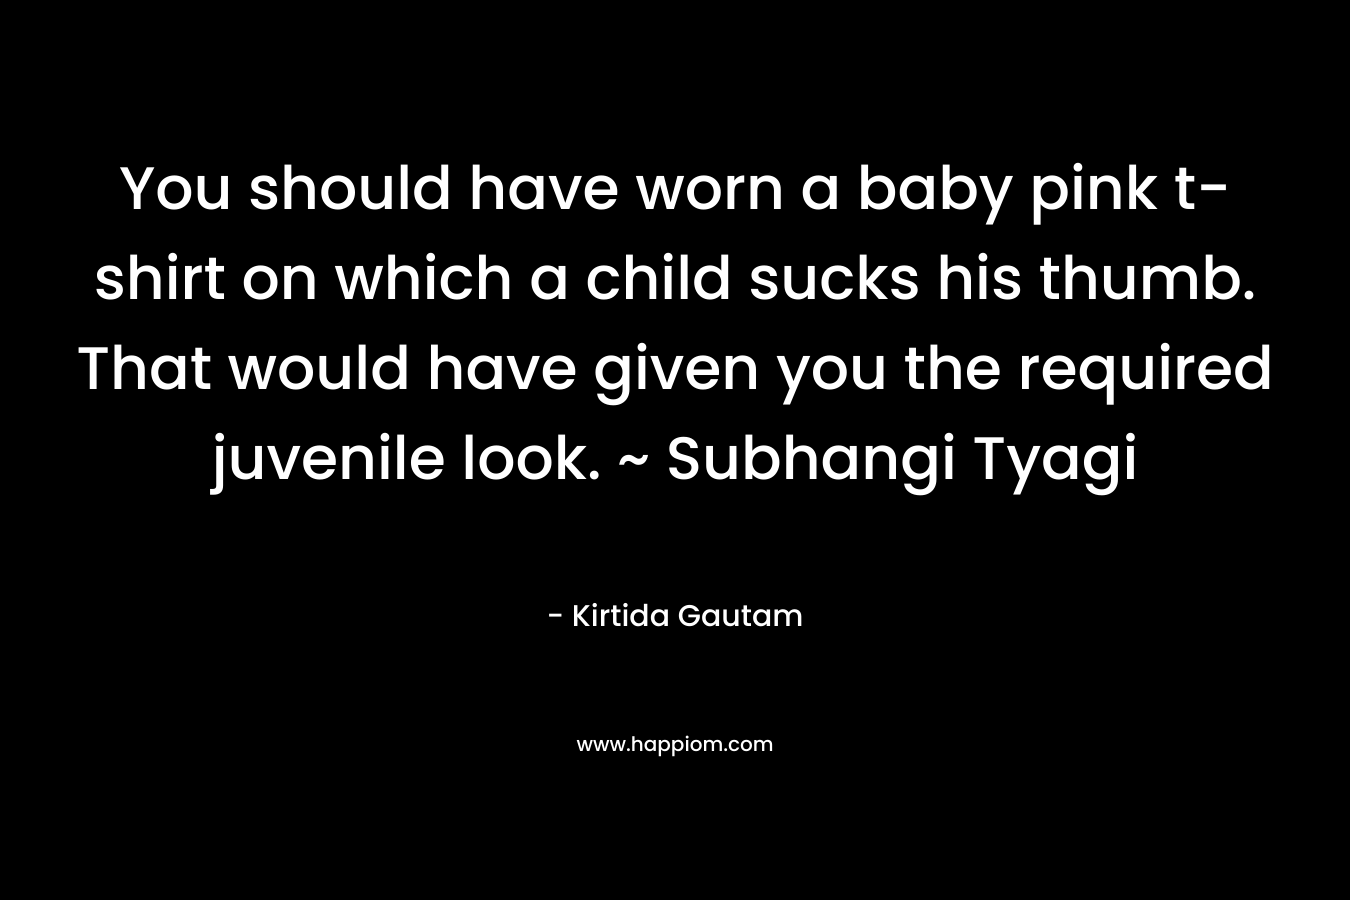 You should have worn a baby pink t-shirt on which a child sucks his thumb. That would have given you the required juvenile look. ~ Subhangi Tyagi